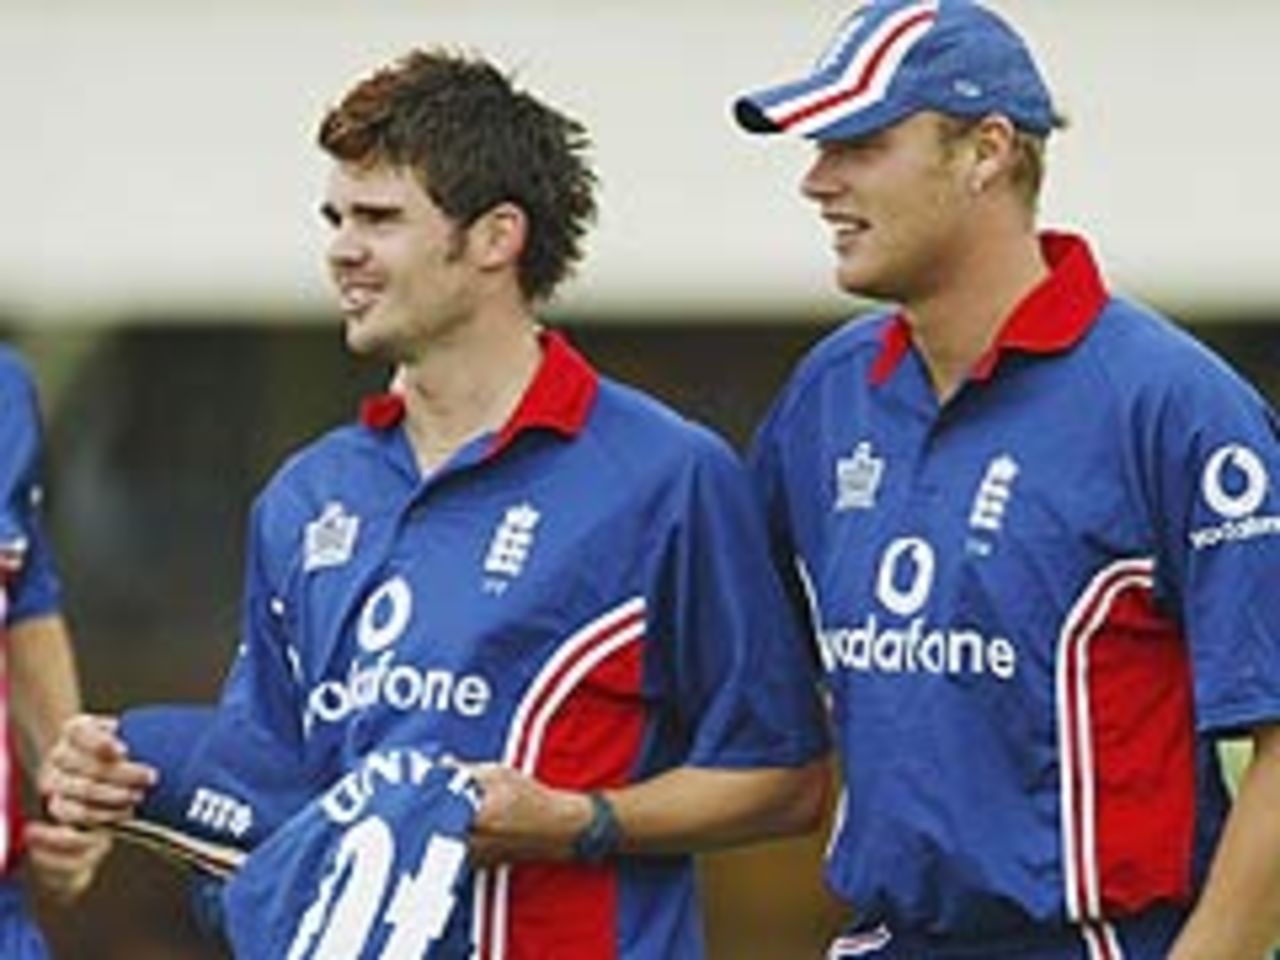 James Anderson bewildered after conceding 19 runs in his first over, England v South Africa, July 8, 2003